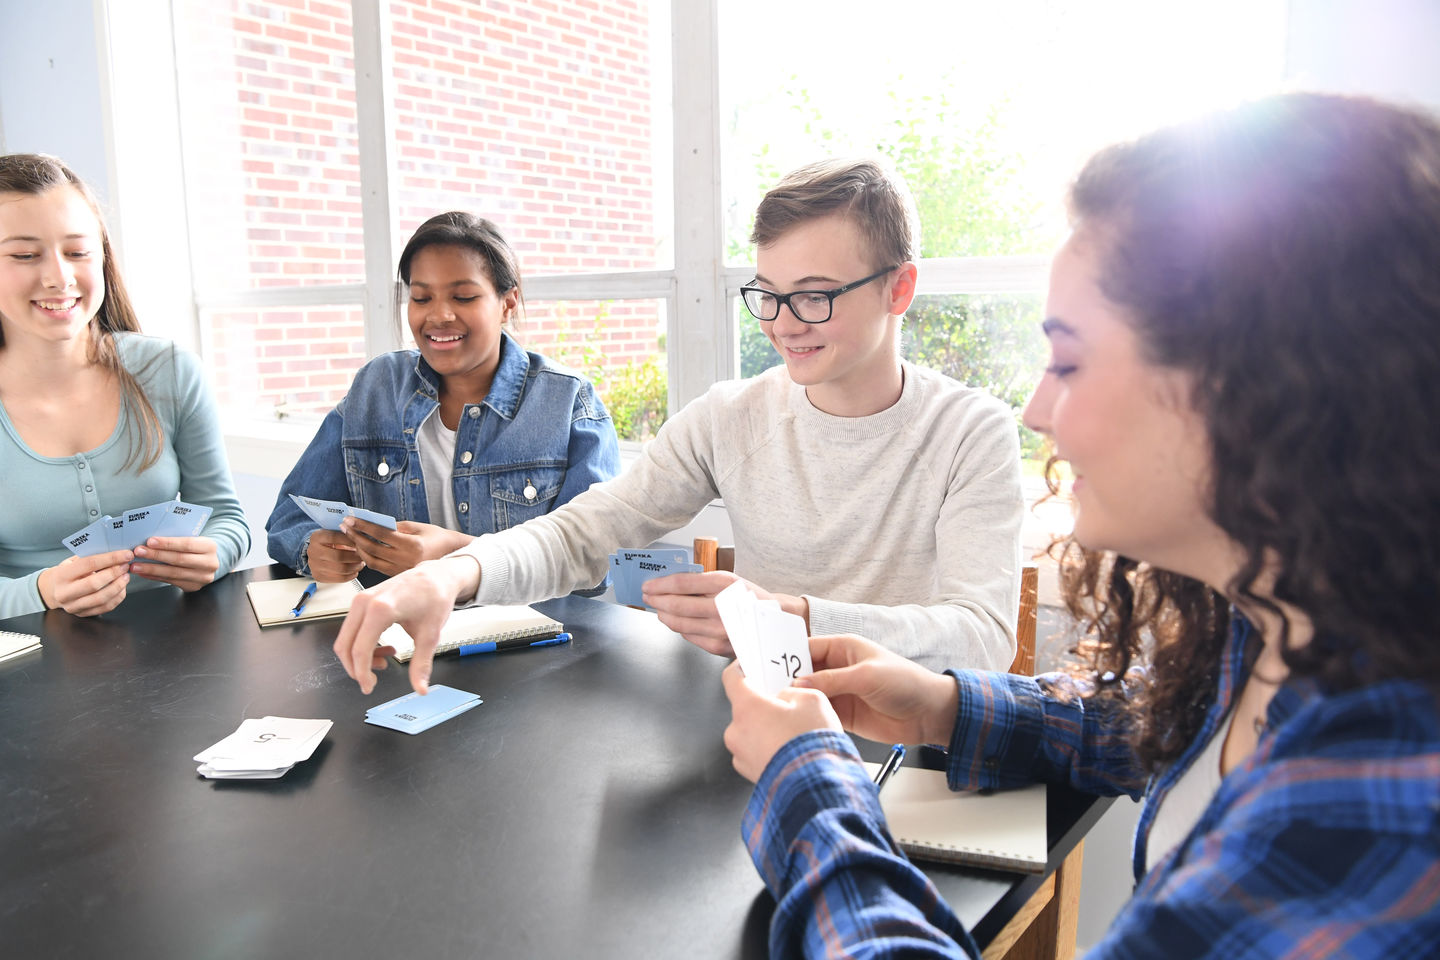 High School students play a math card game at a table.